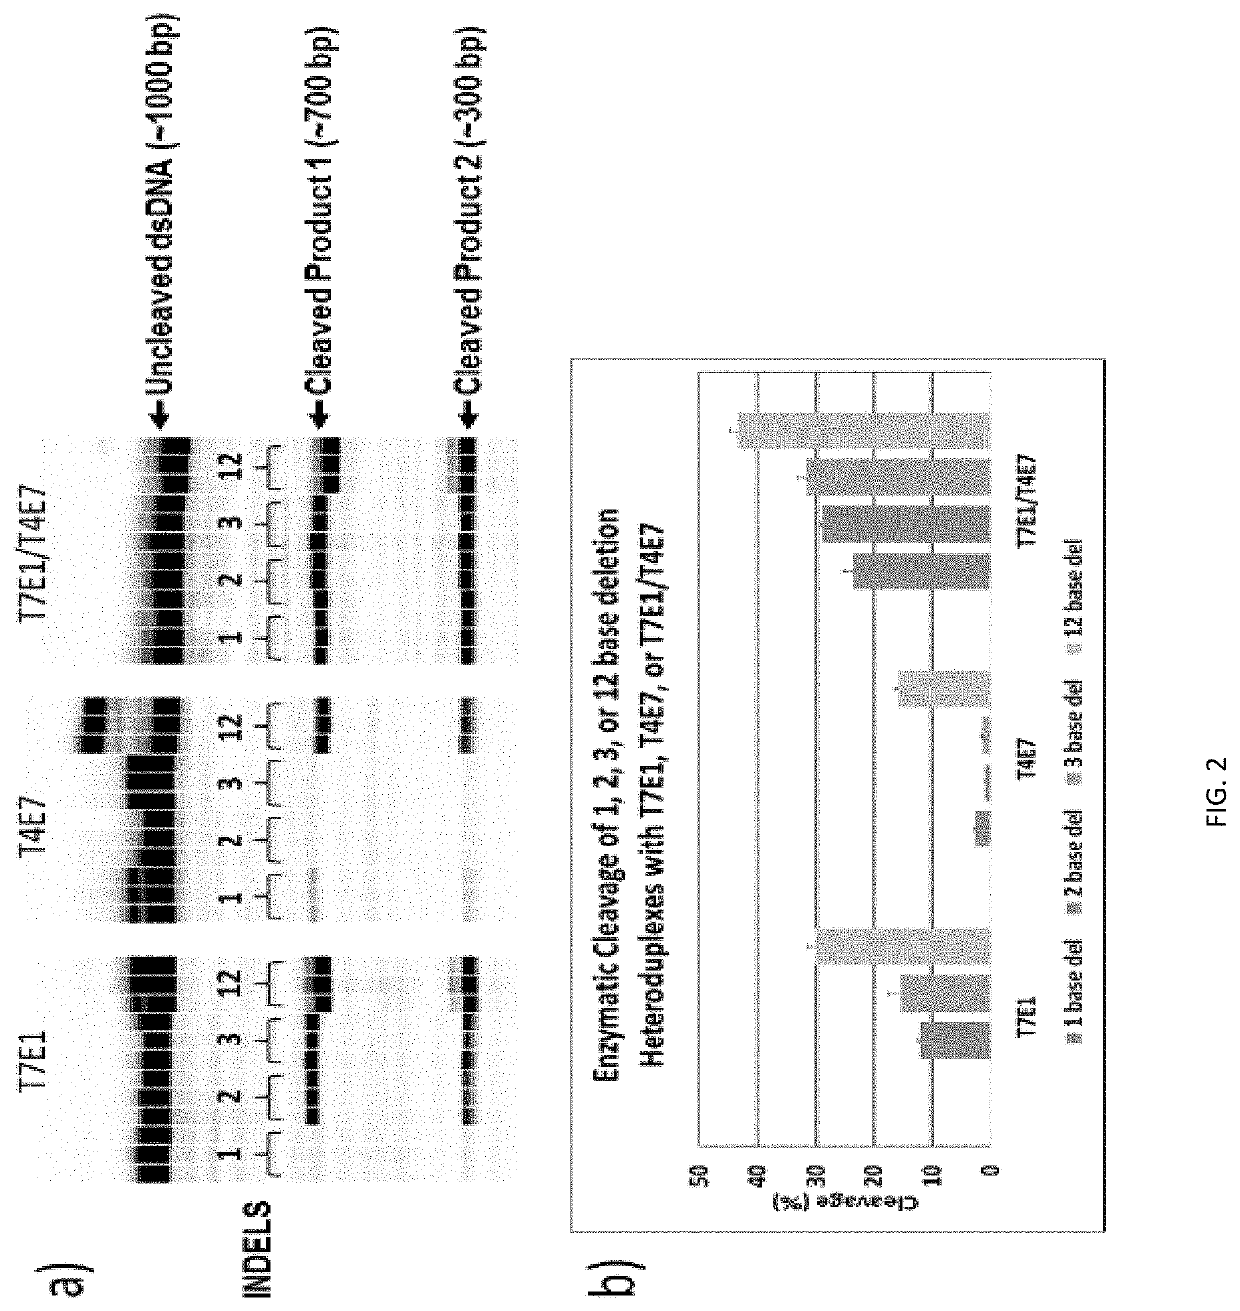 Compositions and methods for improved detection of genomic editing events